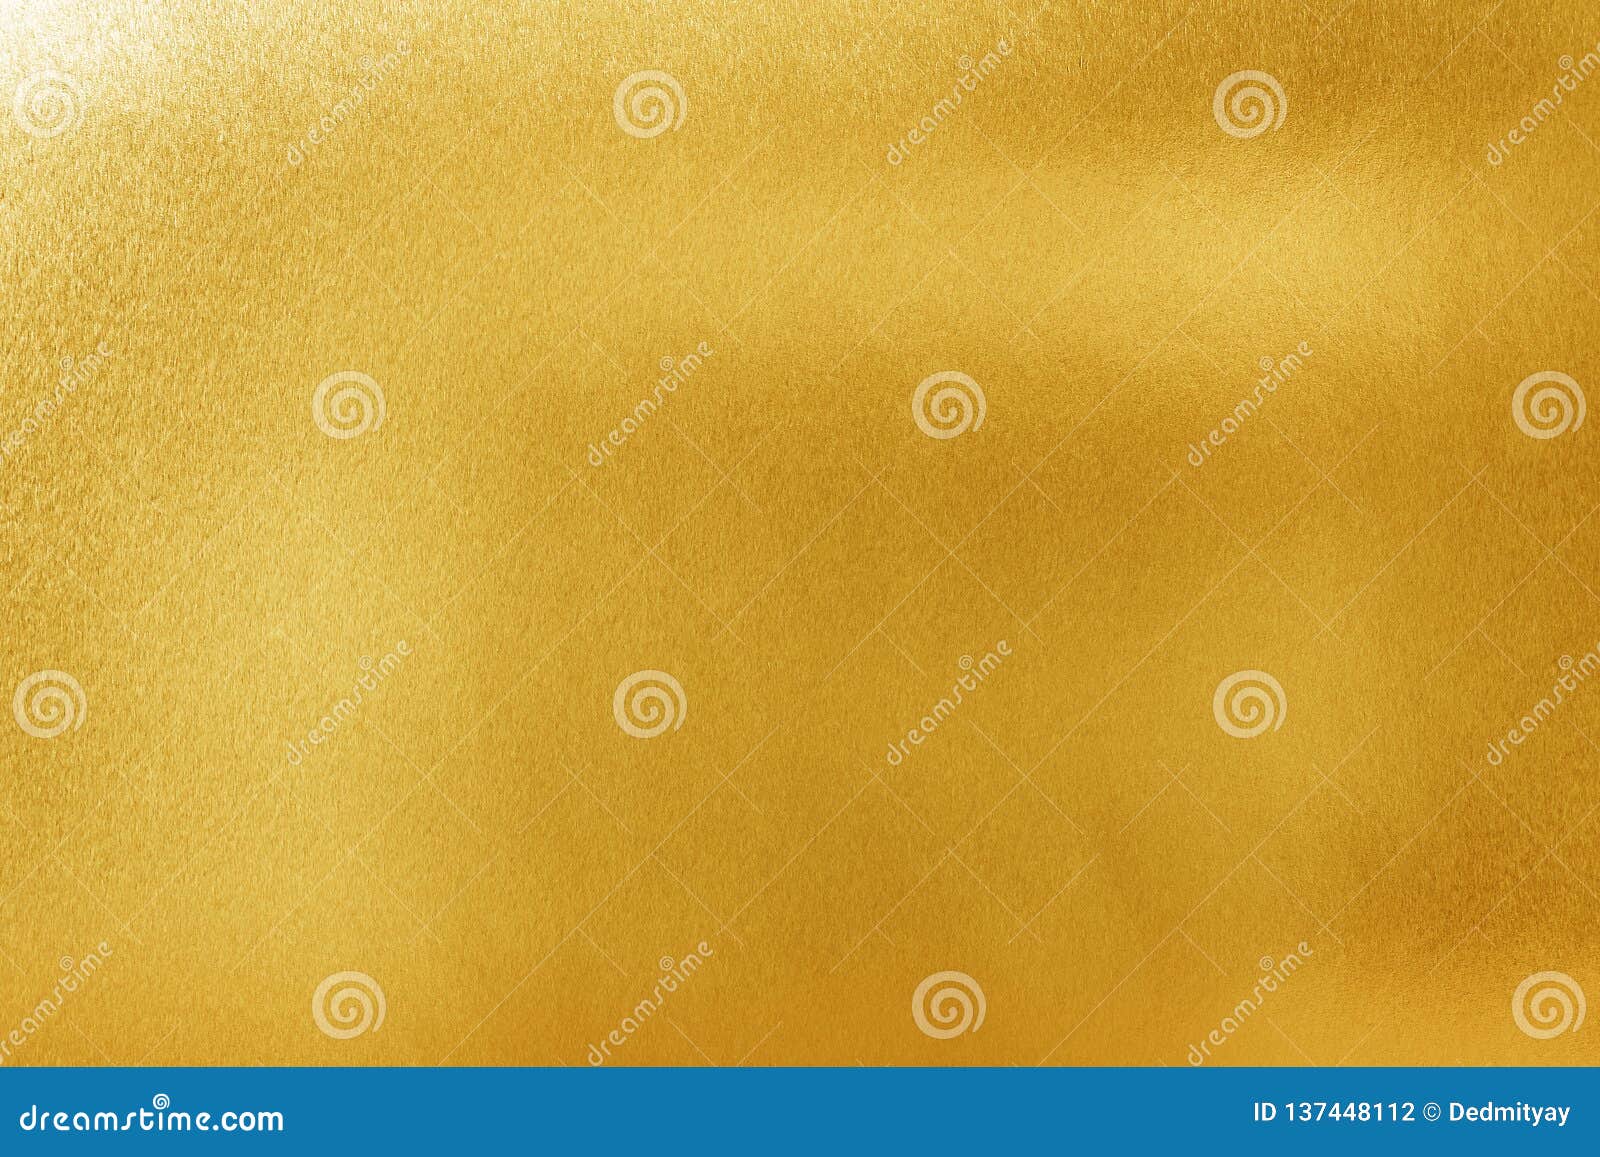 gold texture background for . shiny yellow metal or foil surface material